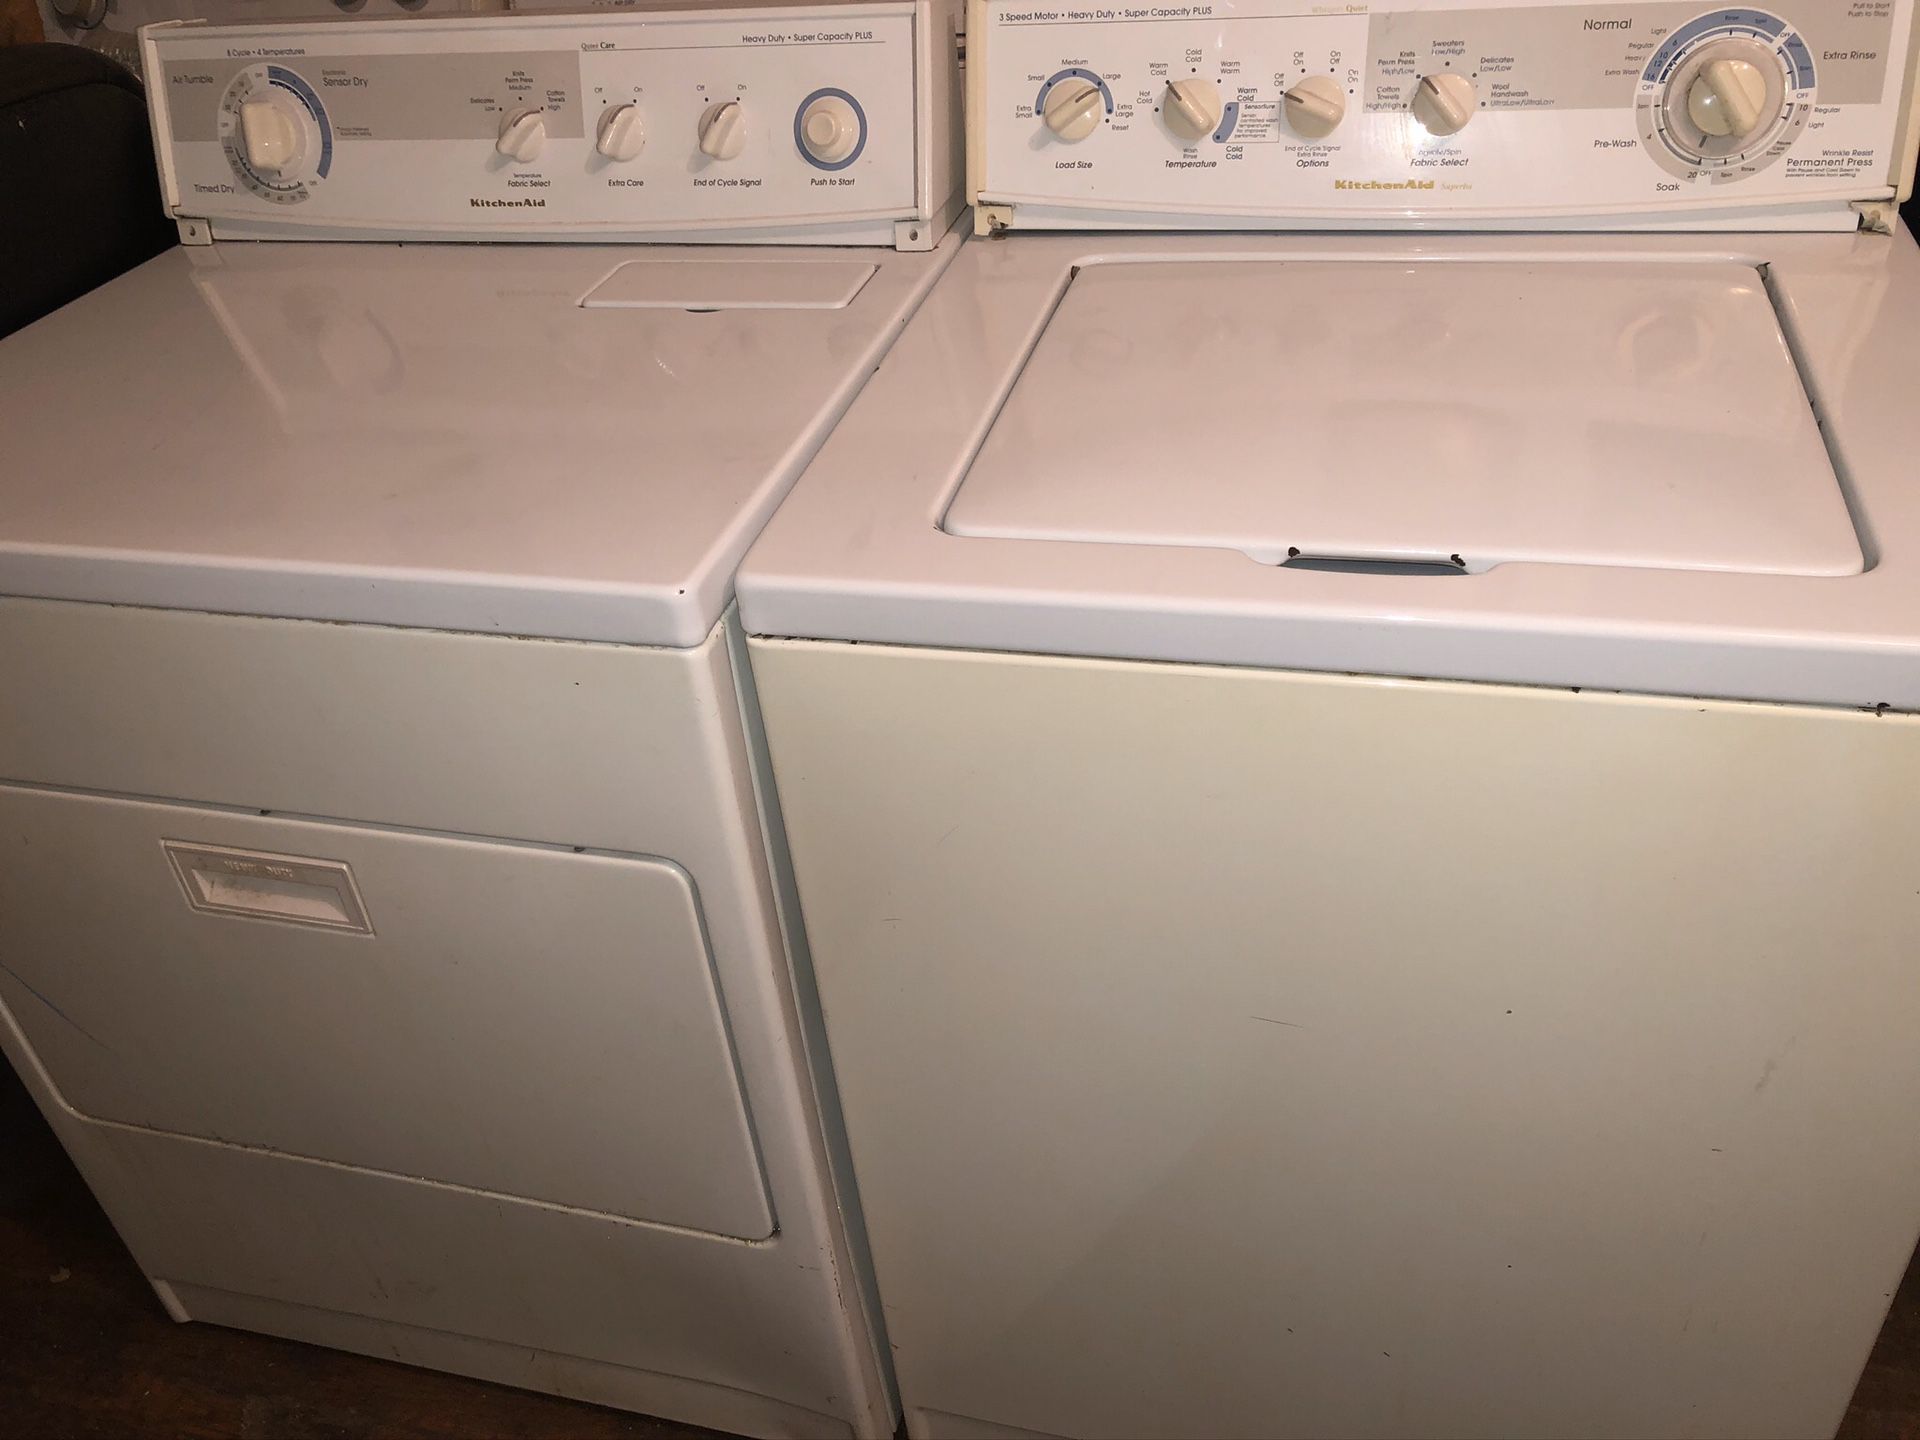 Rare! KitchenAid Washer Dryer! 37 OPTIONS! Super Capacity! 30-Day Guarantee! If you love your KitchenAid mixer, these machines have the same qualit